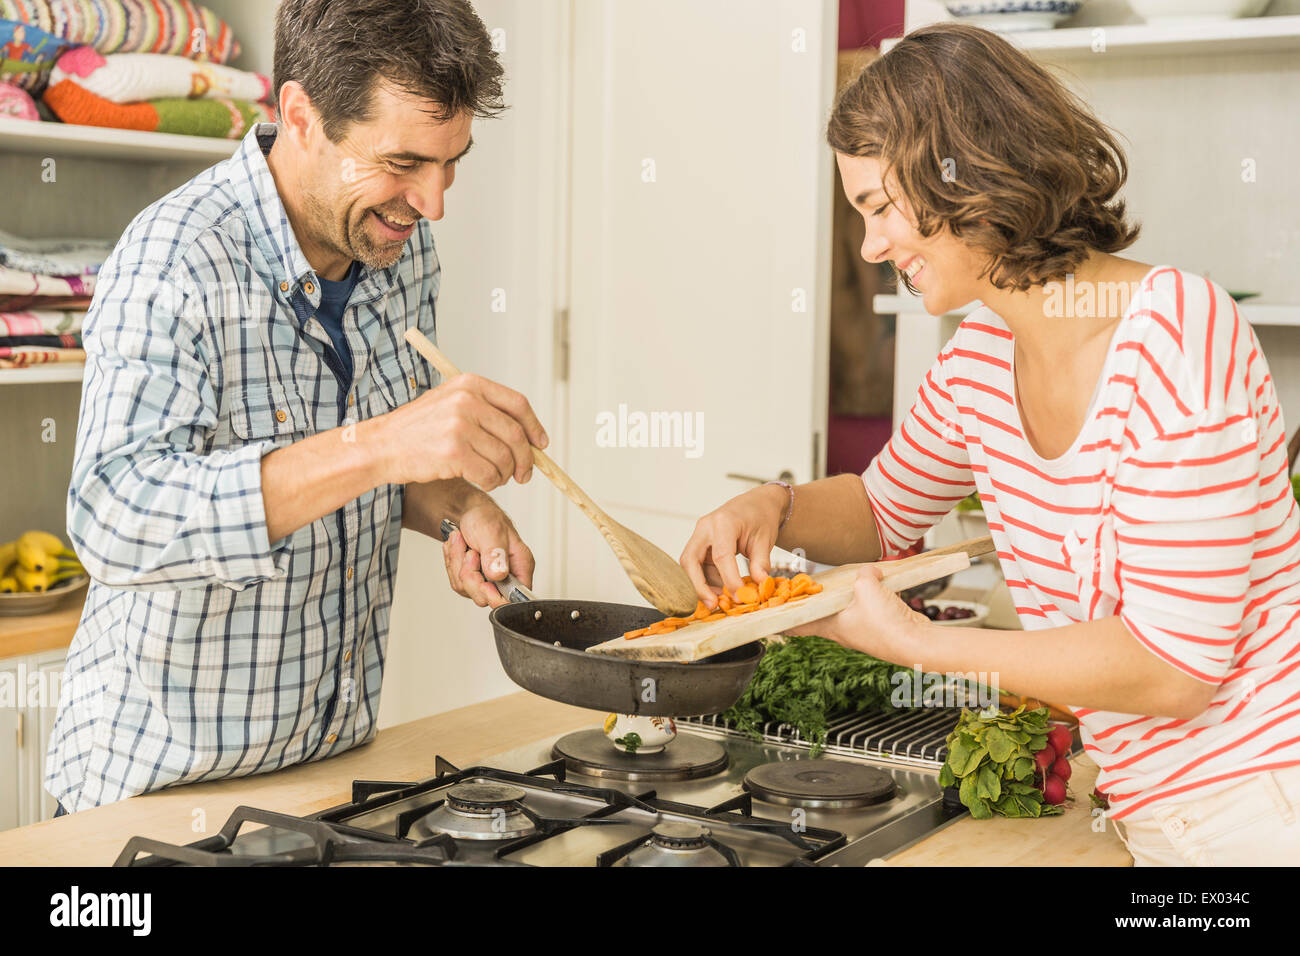 Couple preparing to cook fresh vegetables in kitchen Stock Photo